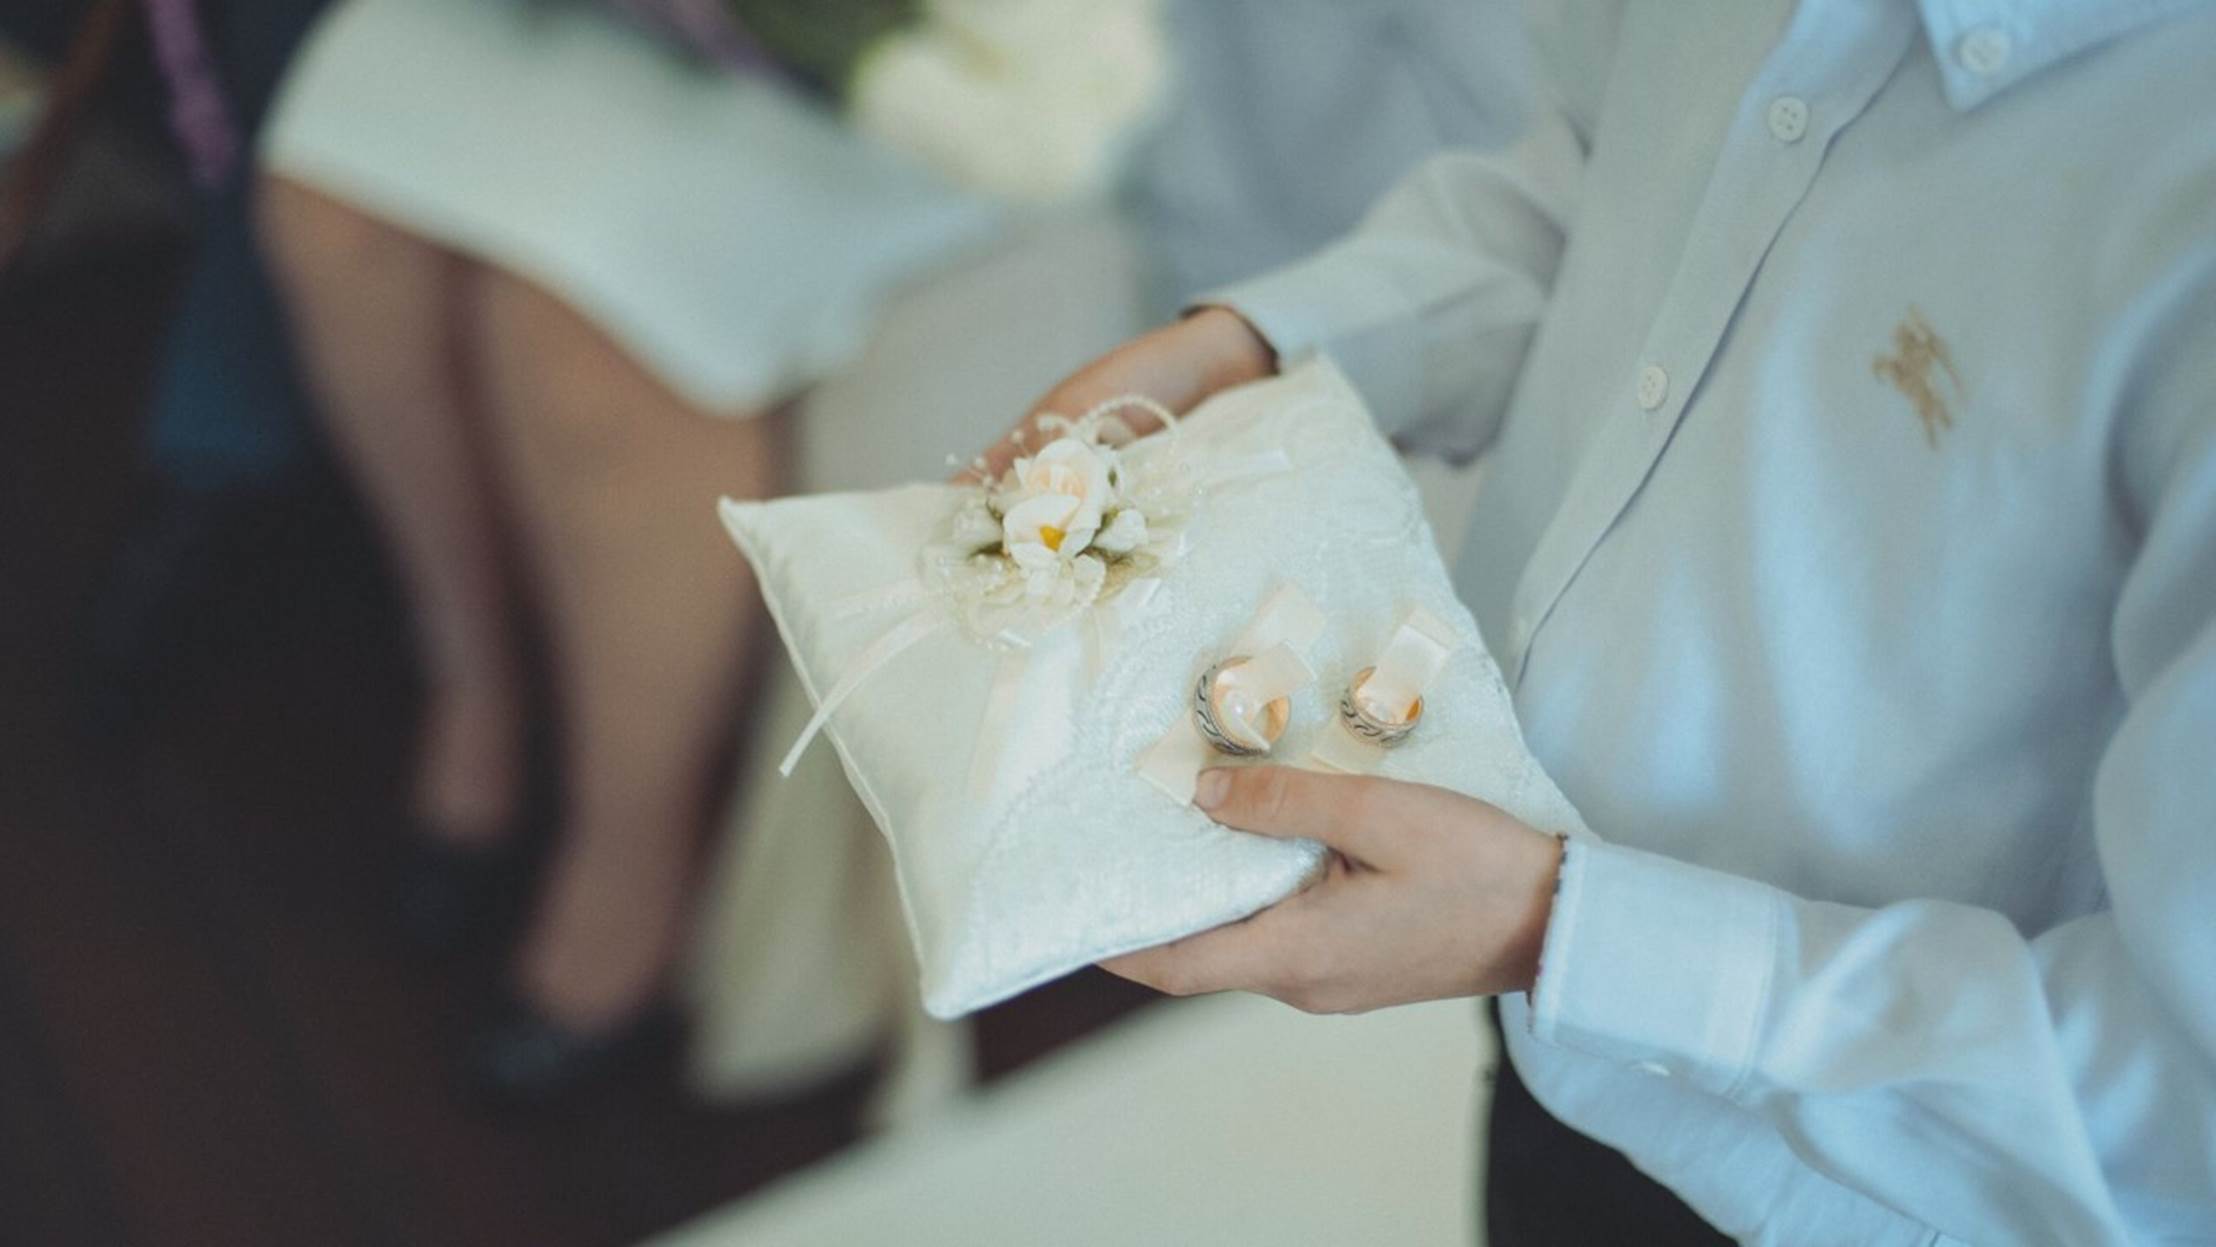 Ring Bearer vs. Page Boy: What Is the Difference?